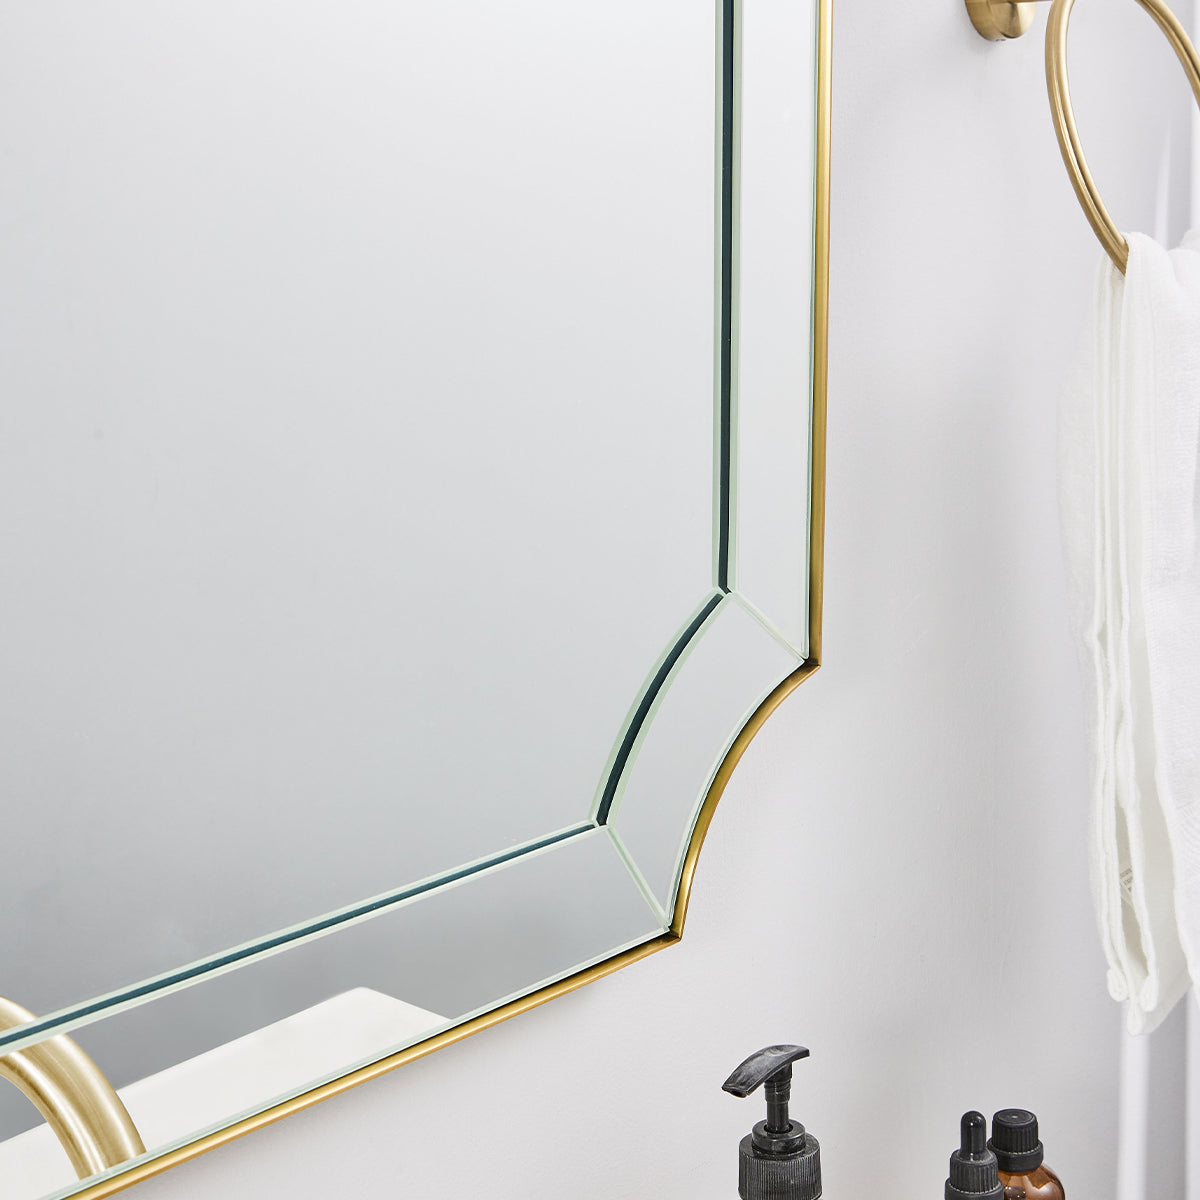 Minuette Scalloped Bathroom Decor Wall Mirrors Brushed Gold | Stainless Steel Frame